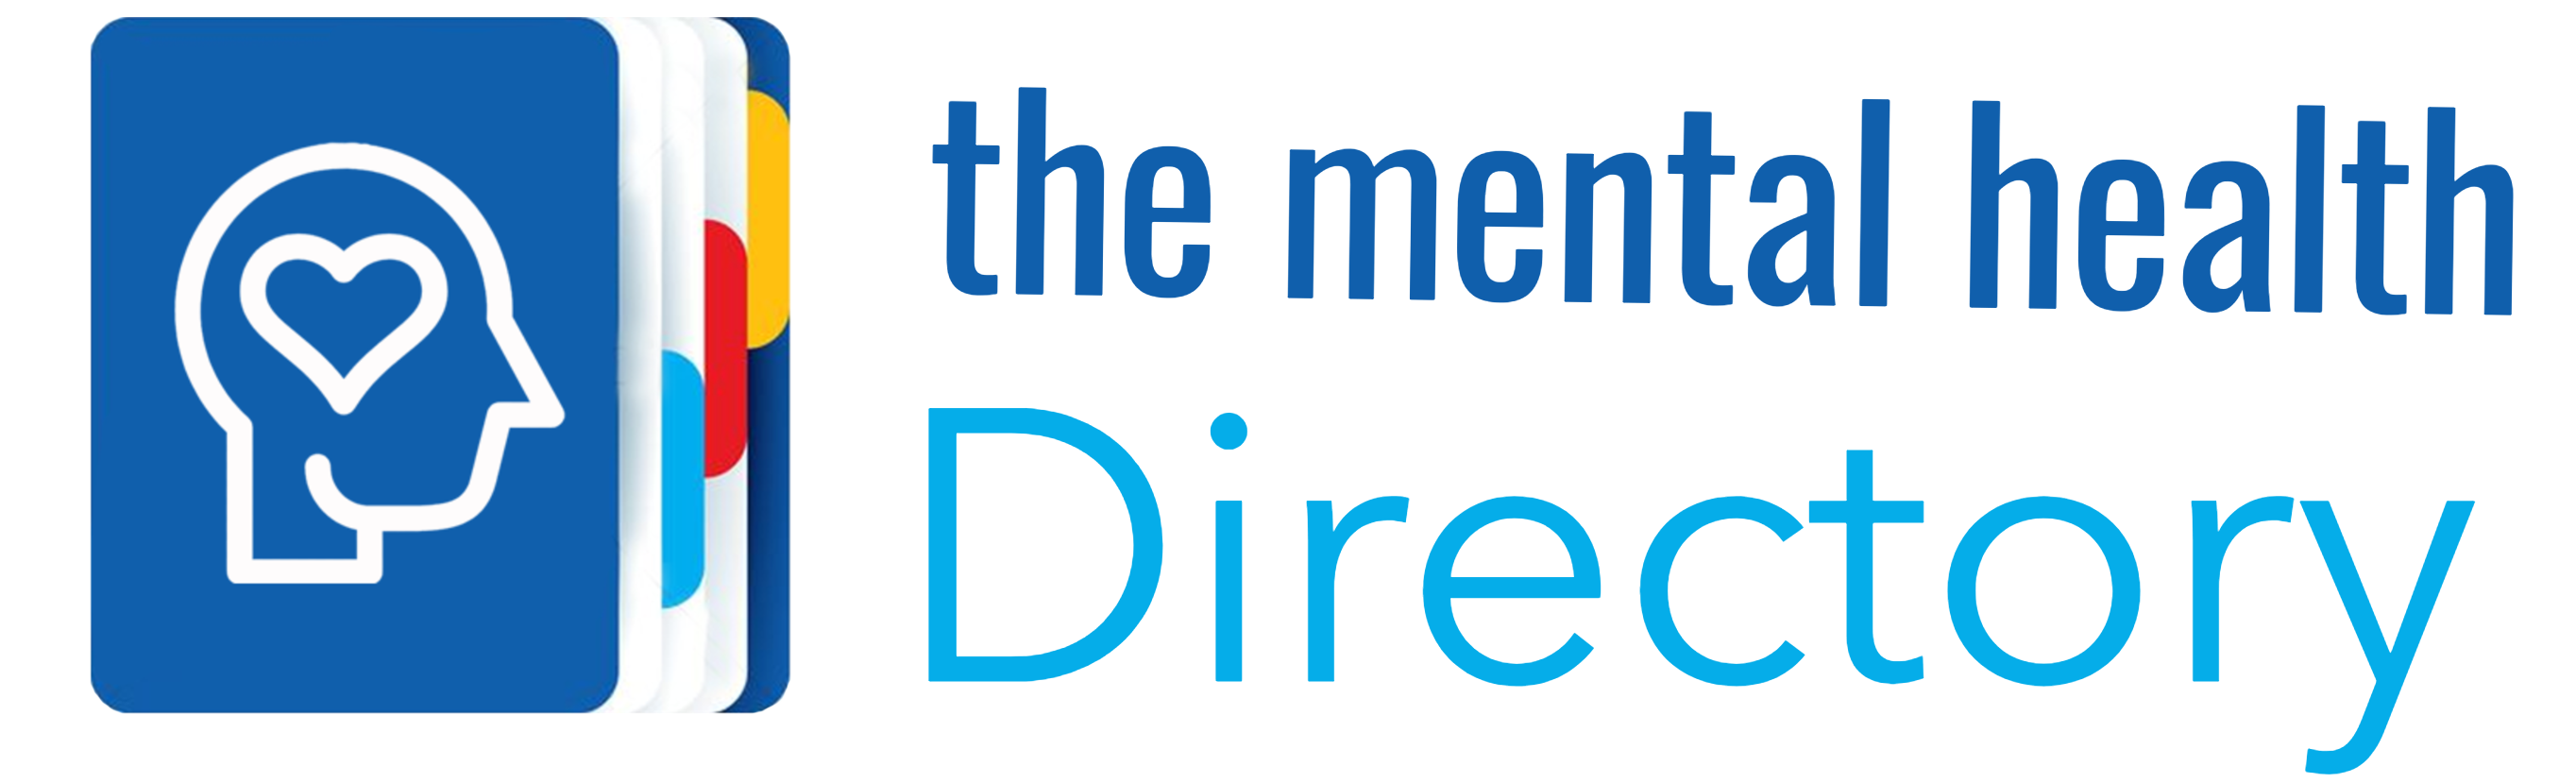 The Mental Health Directory